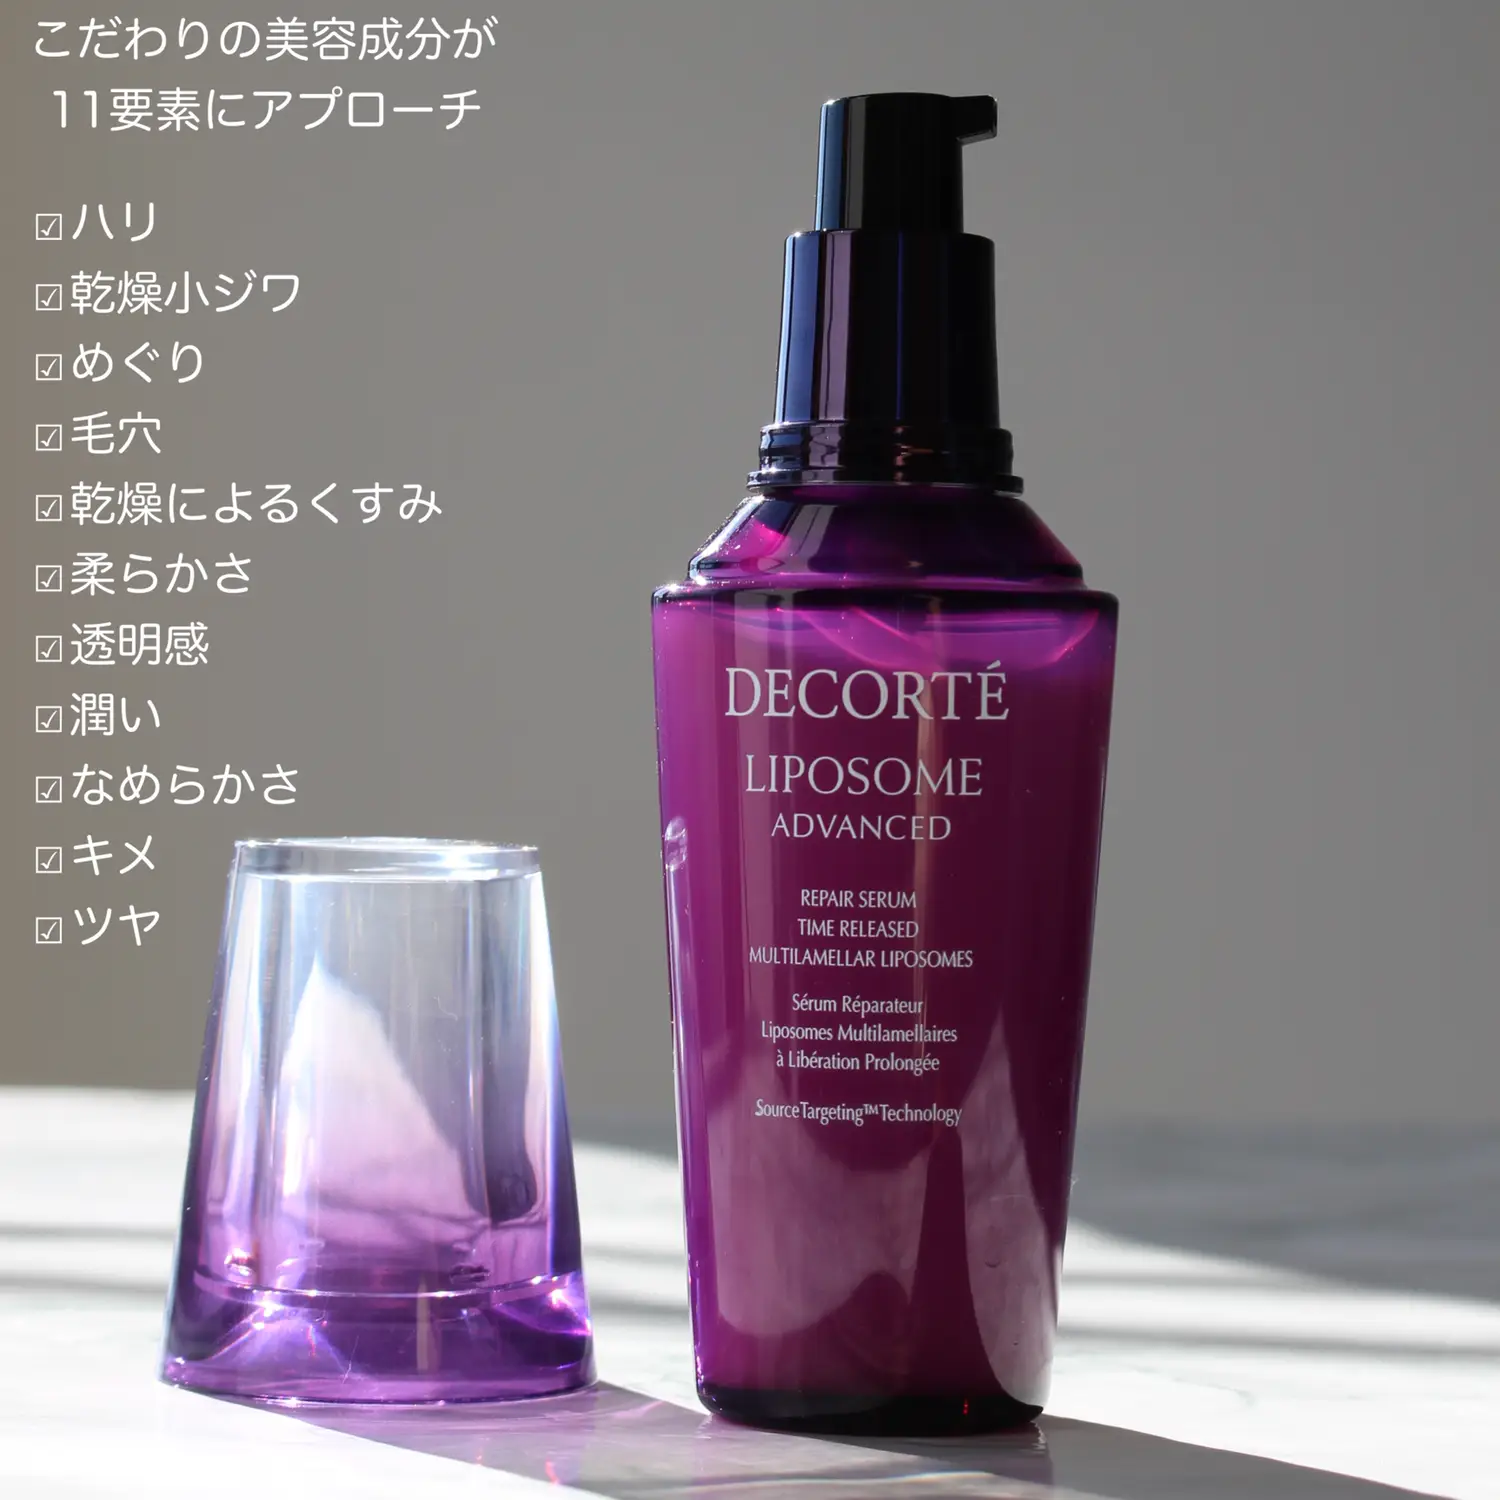 Released on September 16th! CosDeco's representative beauty